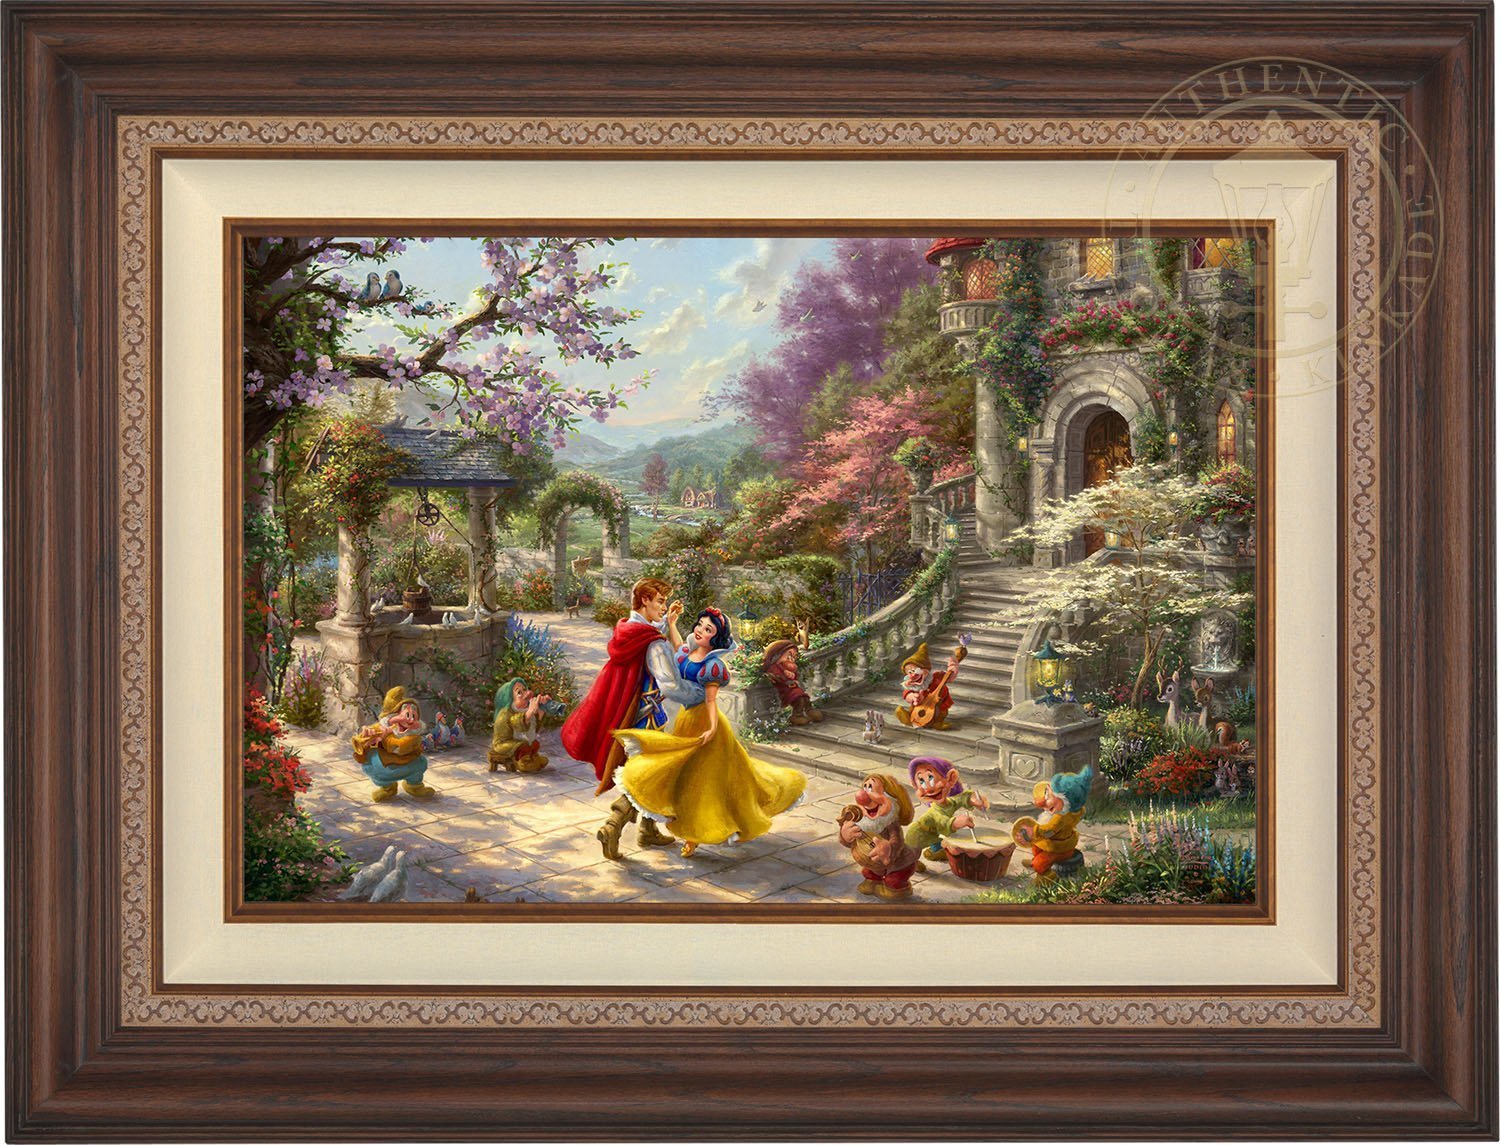 Snow White and the Prince dancing in the courtyard, accompanied by the Seven Dwarfs - Dark Walnut Frame